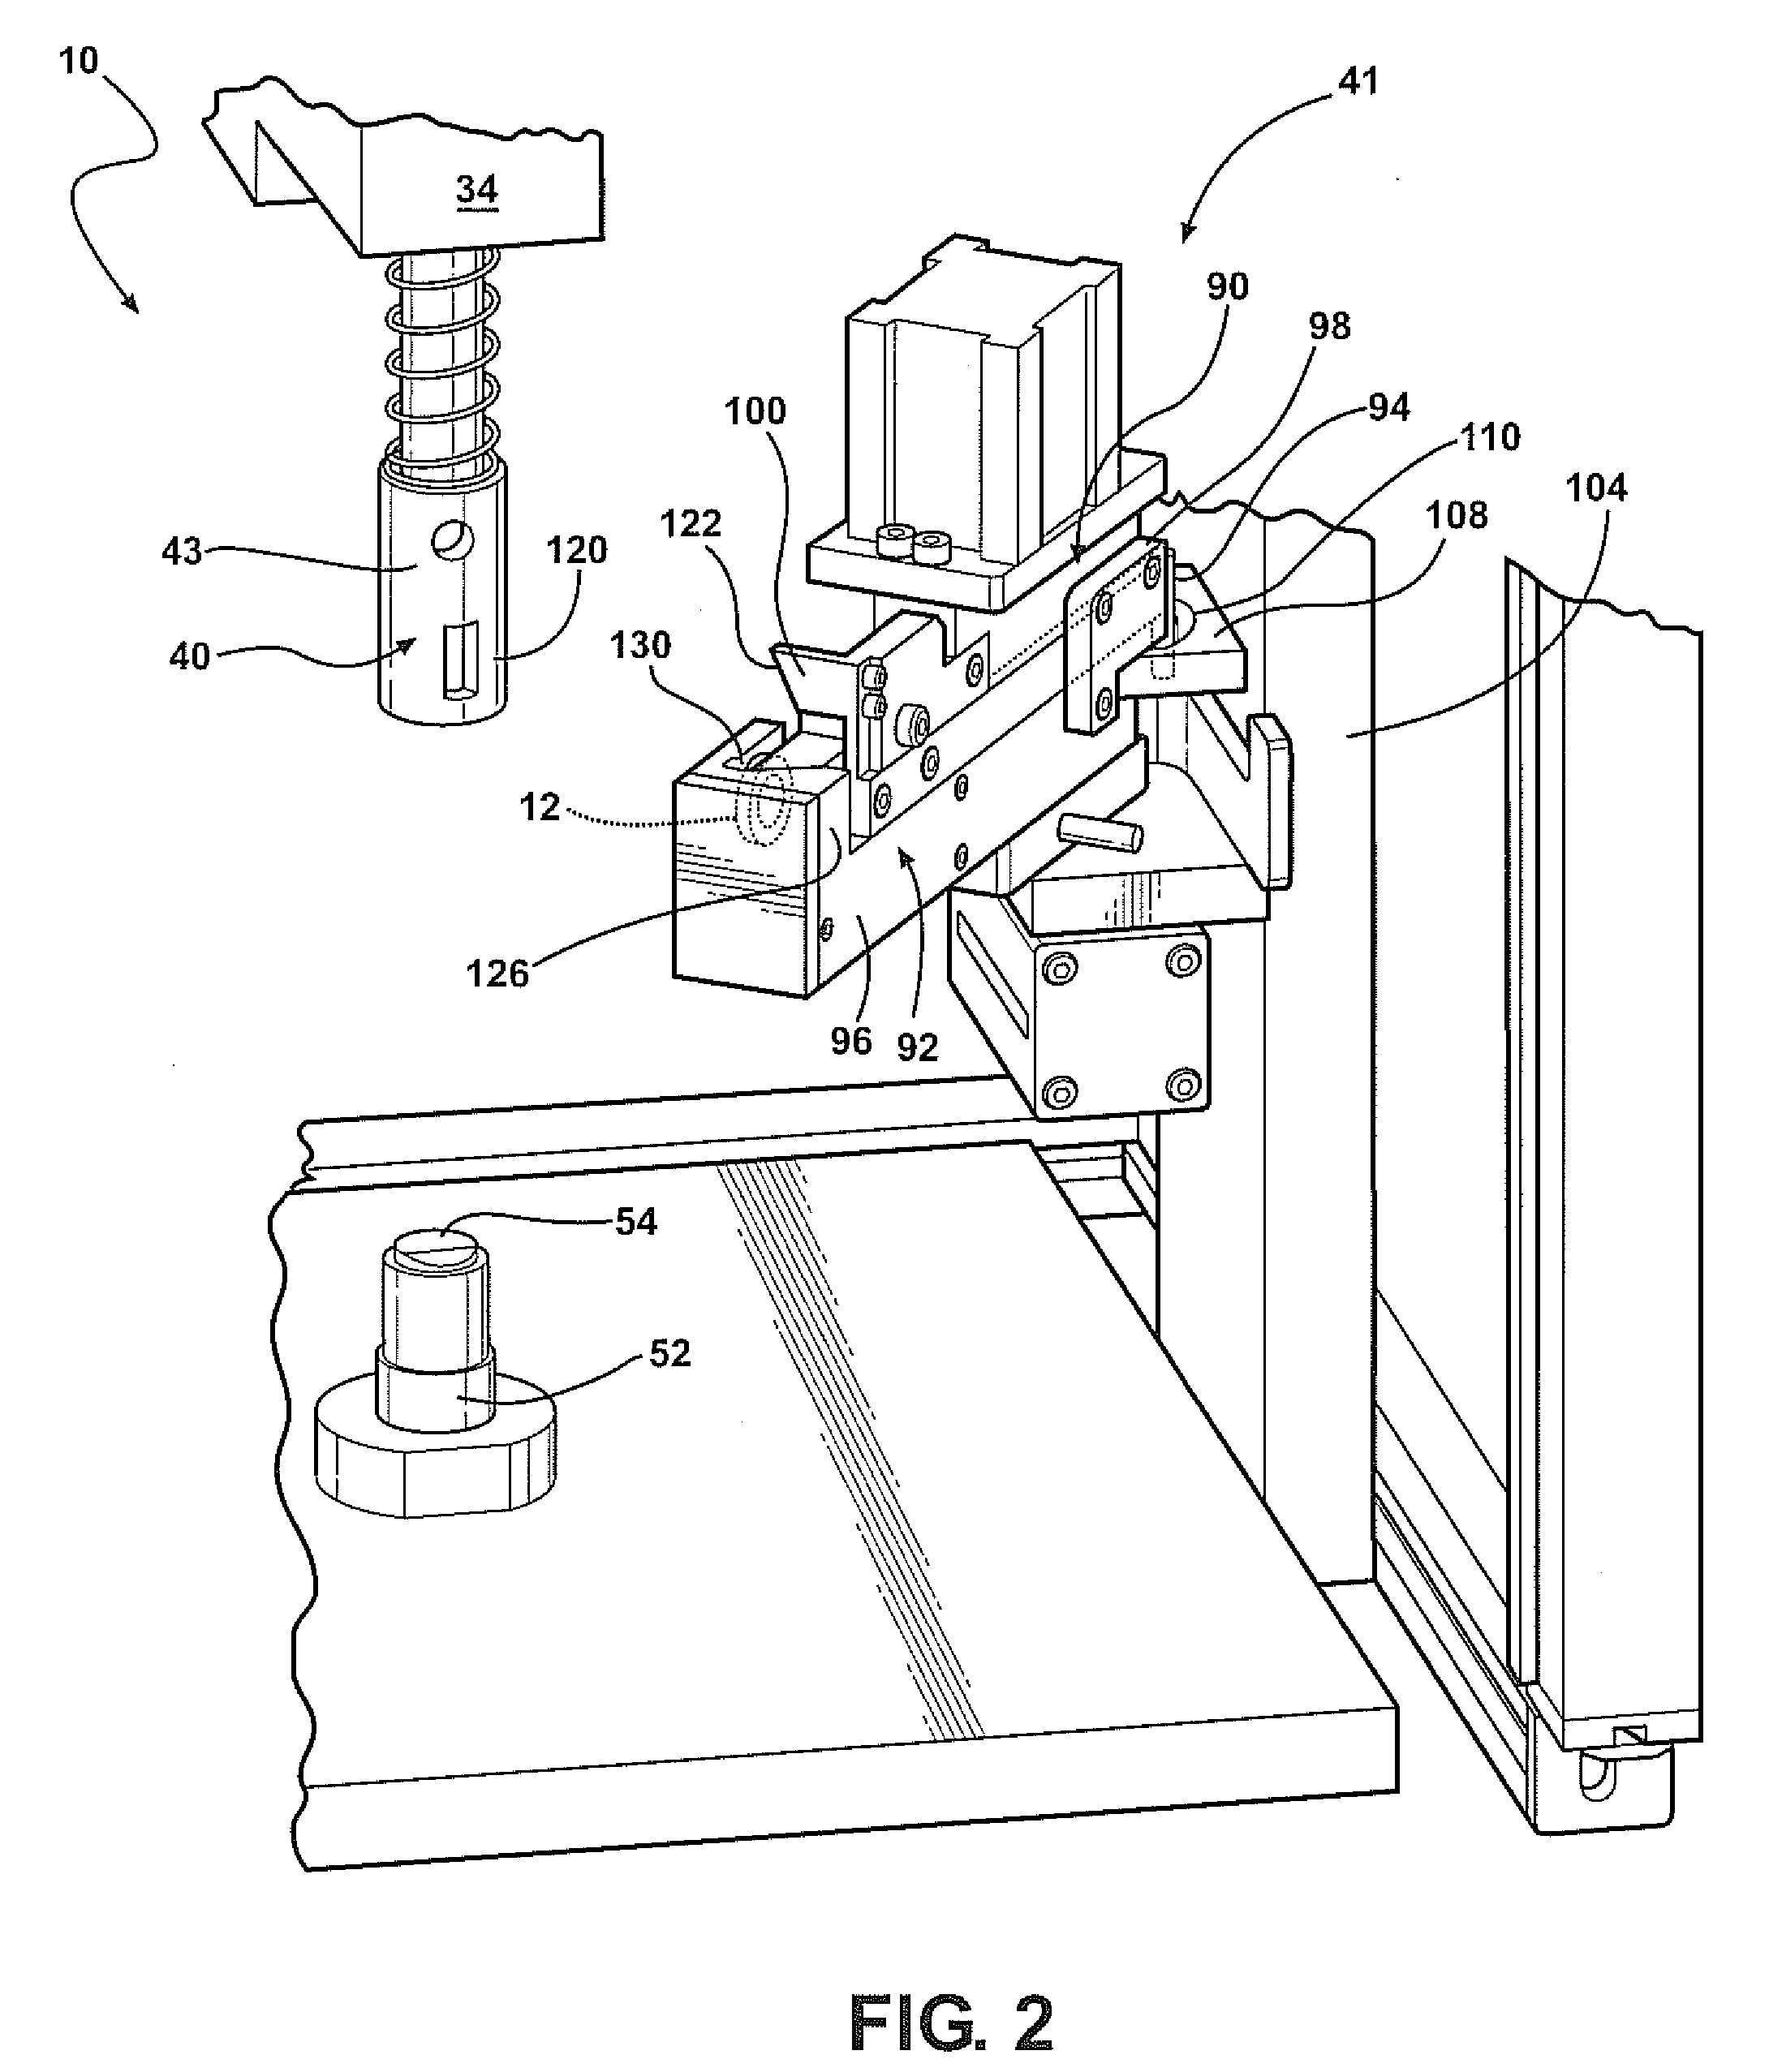 Apparatus and method of forming the brake actuator